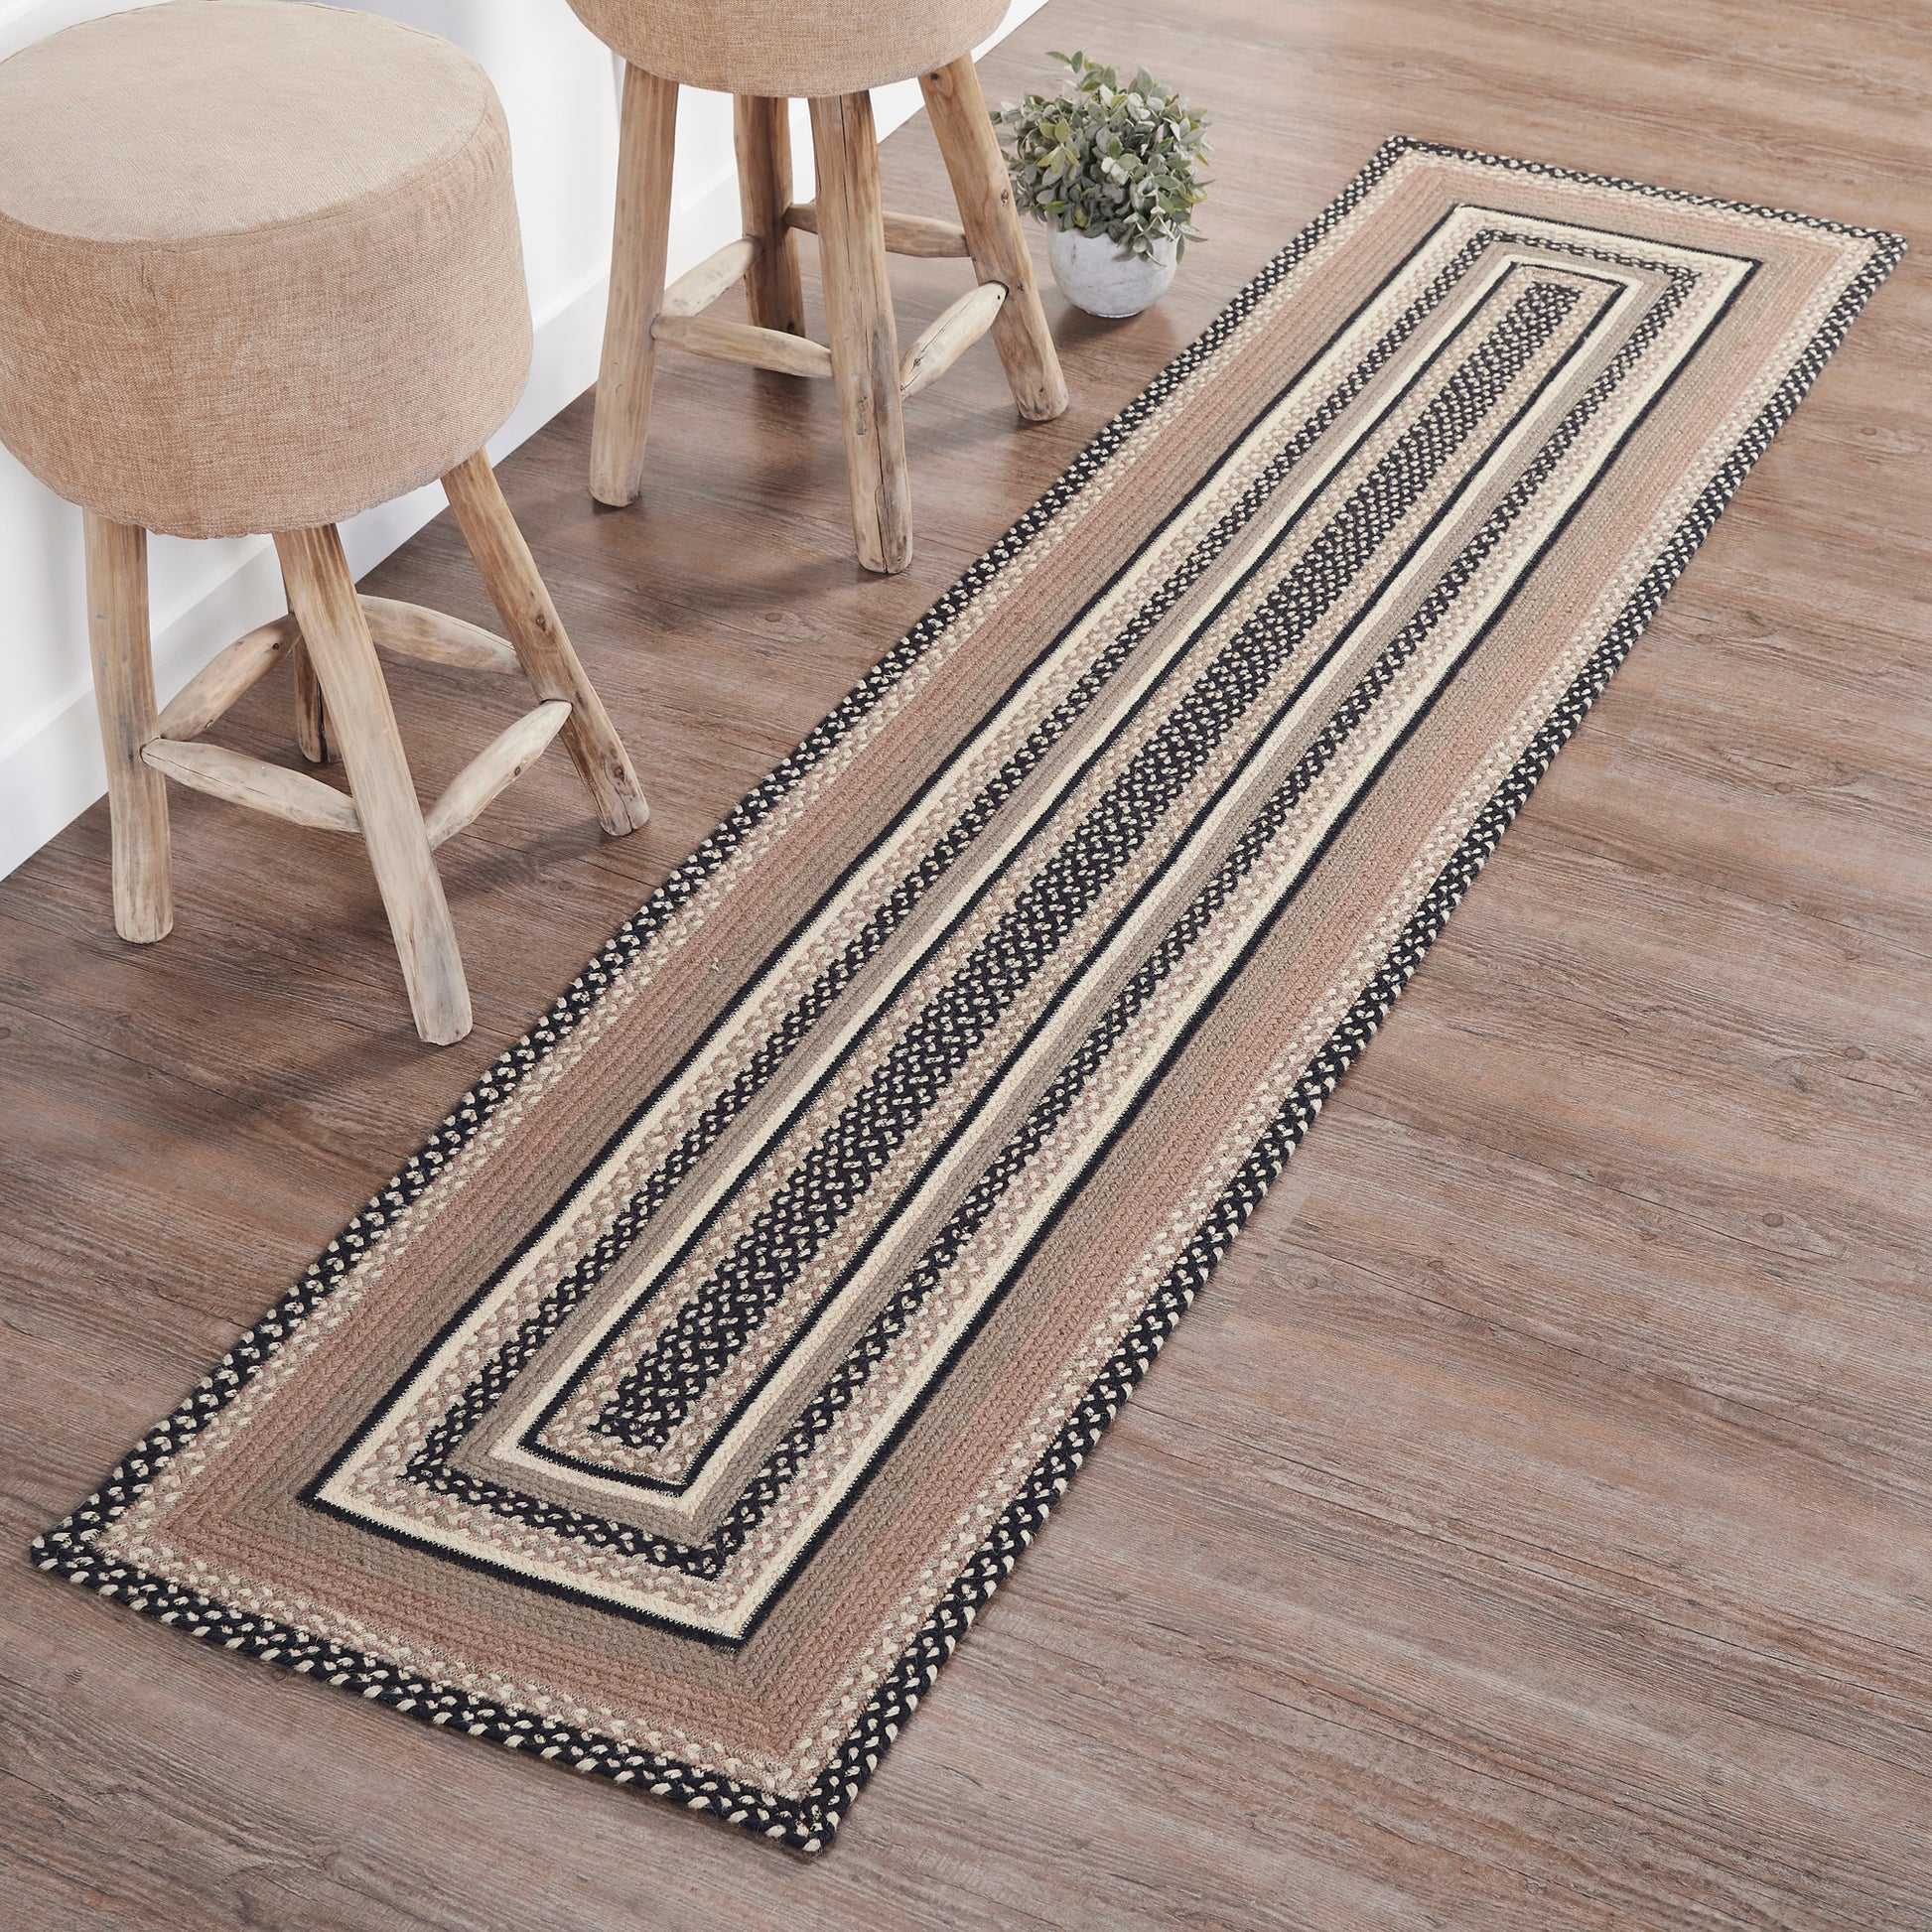 81459-Sawyer-Mill-Charcoal-Creme-Jute-Rug-Runner-Rect-w-Pad-24x96-image-4